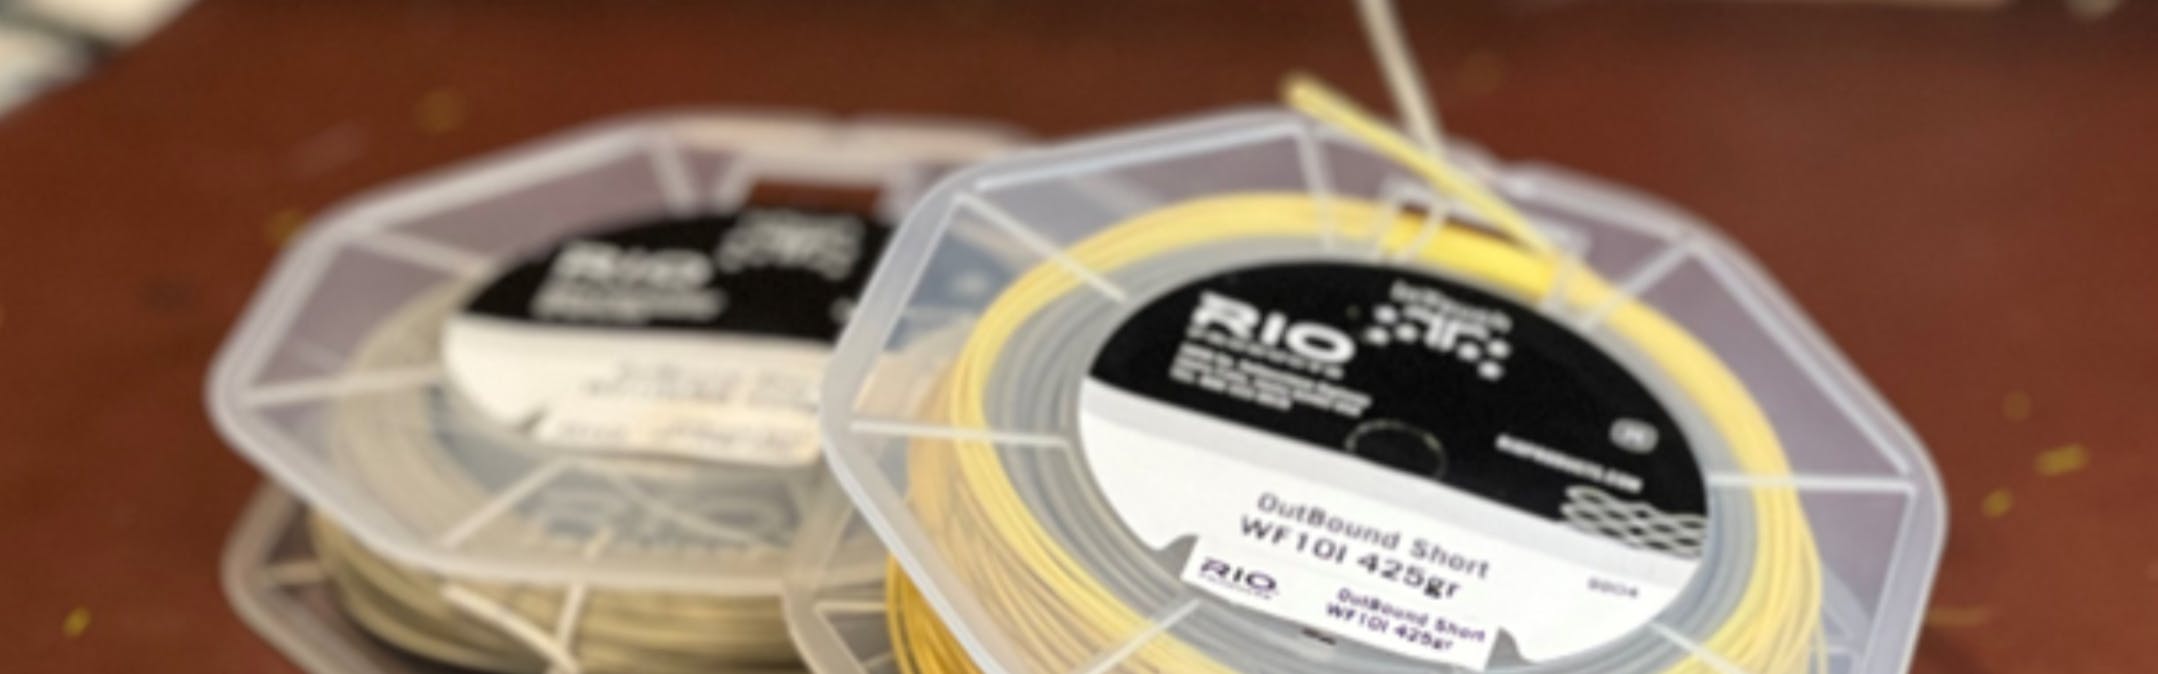 The Rio InTouch Outbound Short Fishing Line.